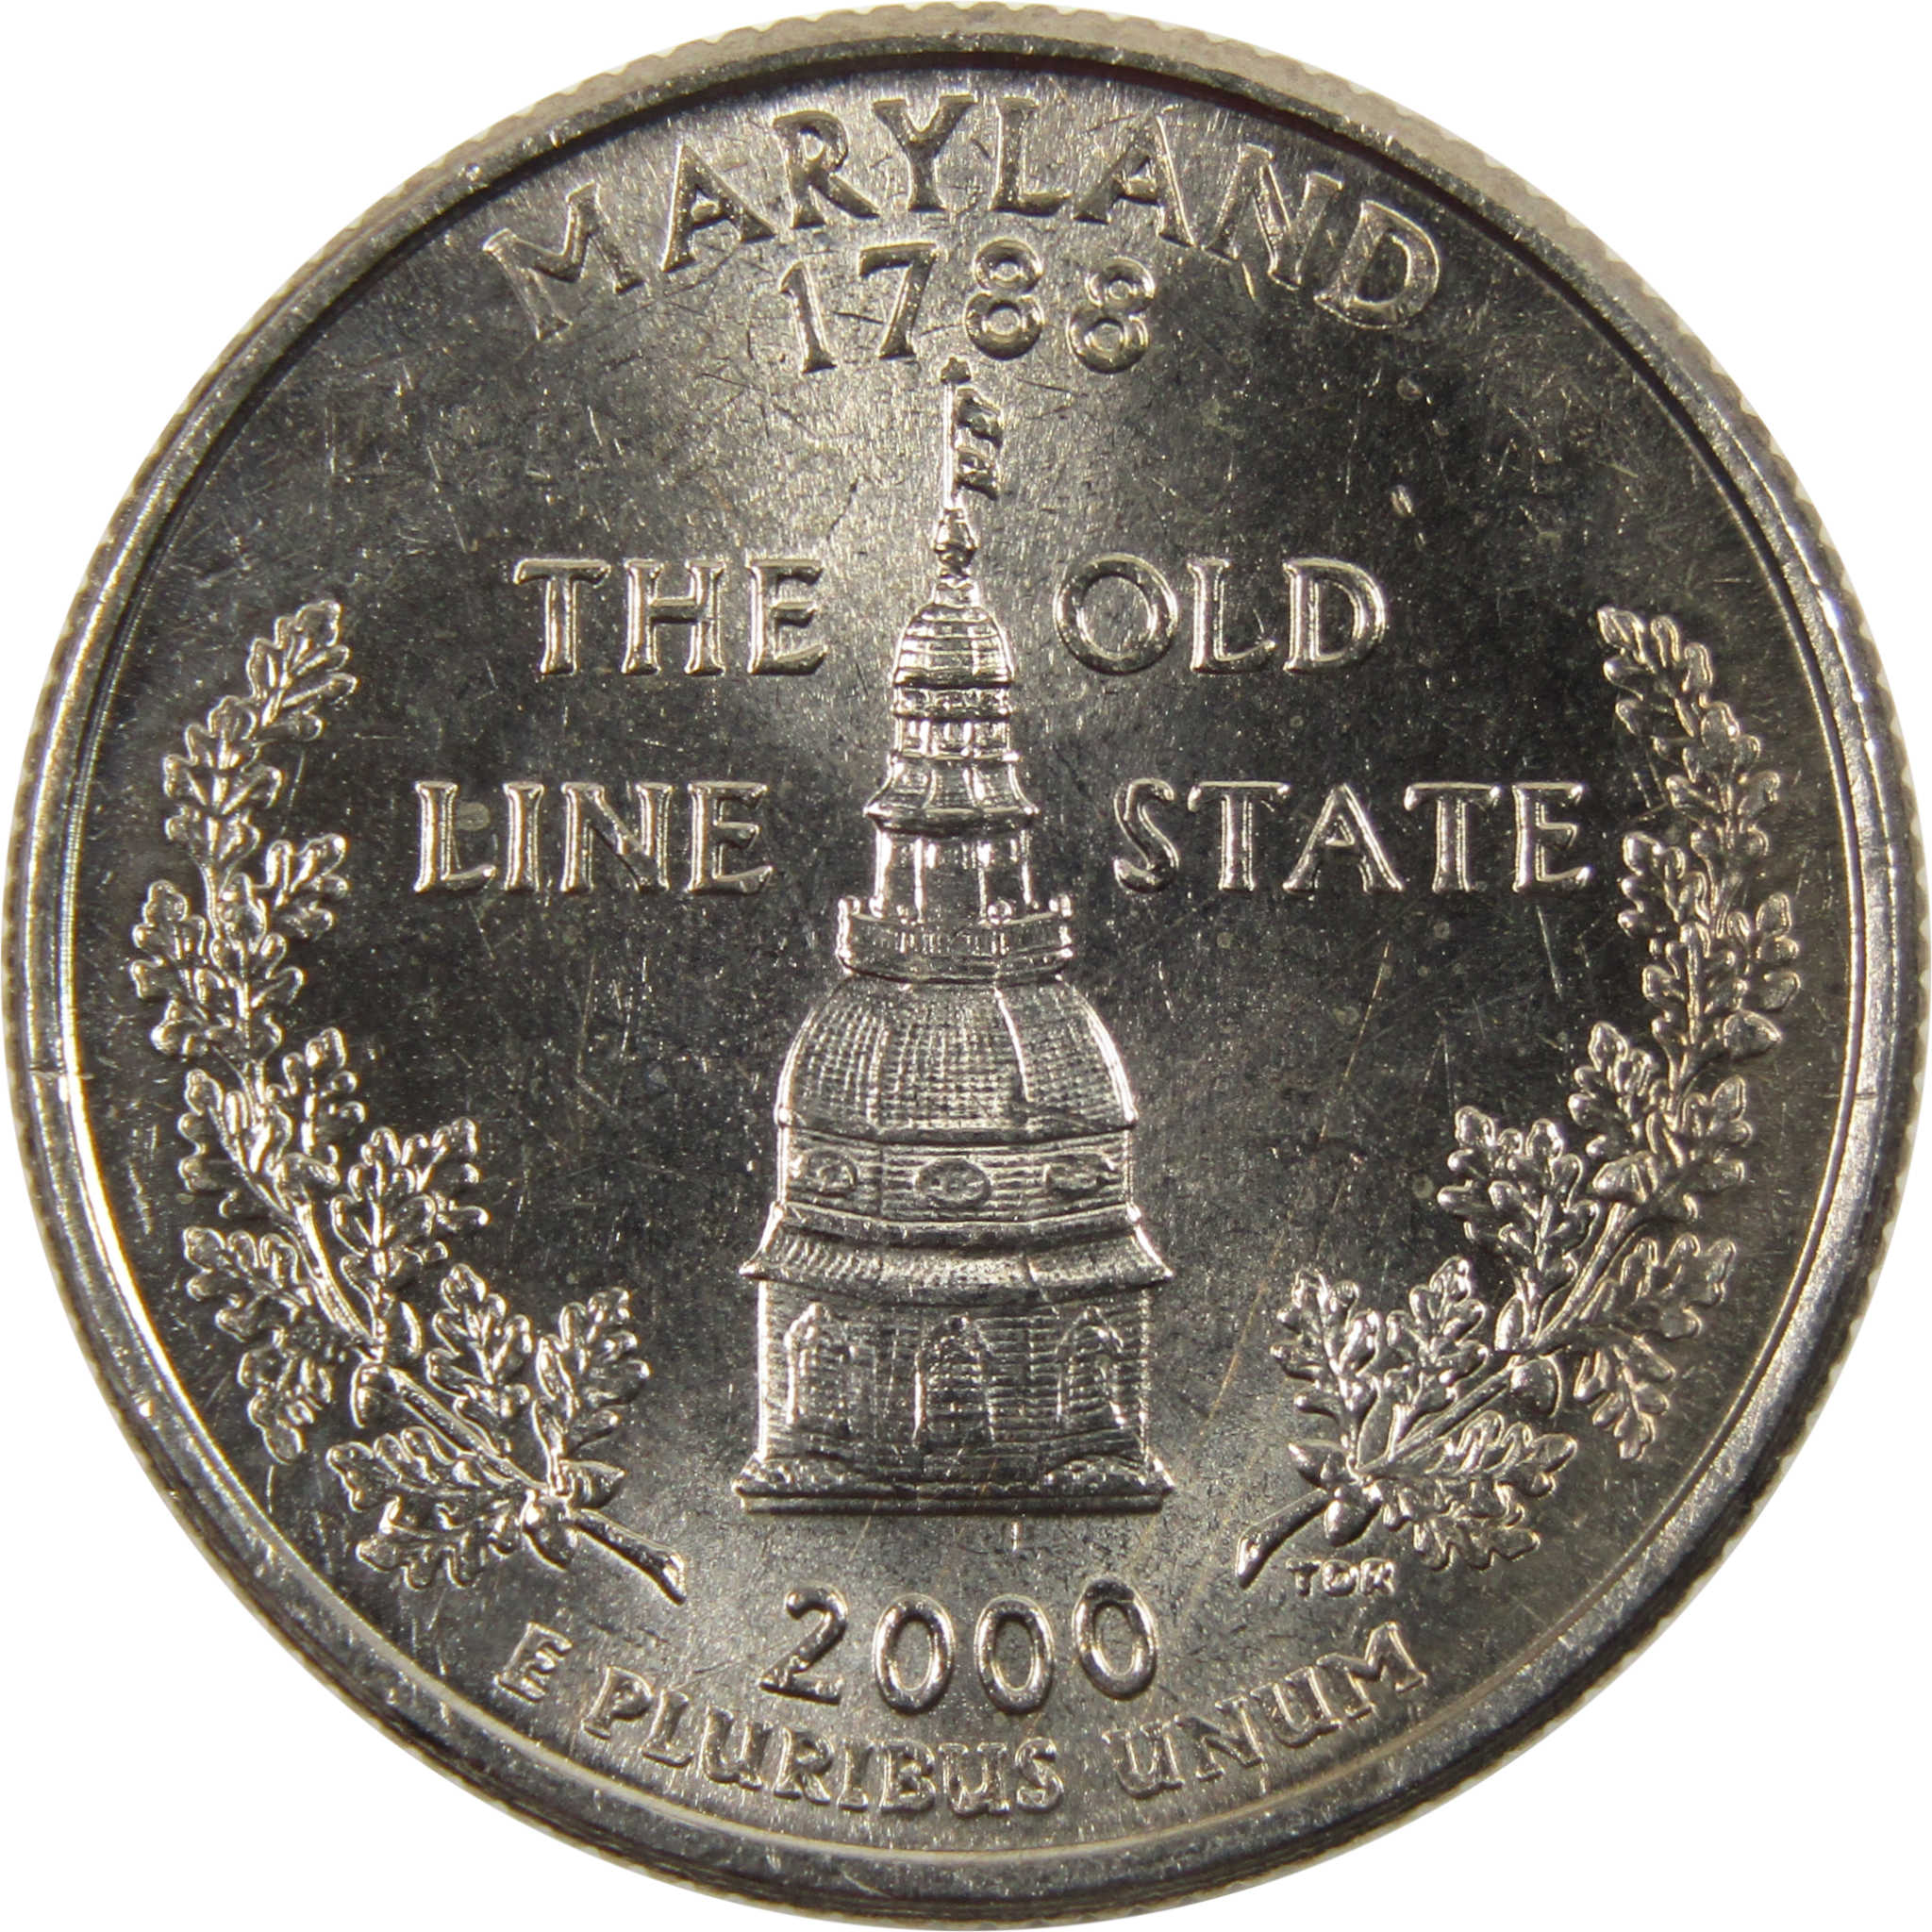 2000 P Maryland State Quarter BU Uncirculated Clad 25c Coin